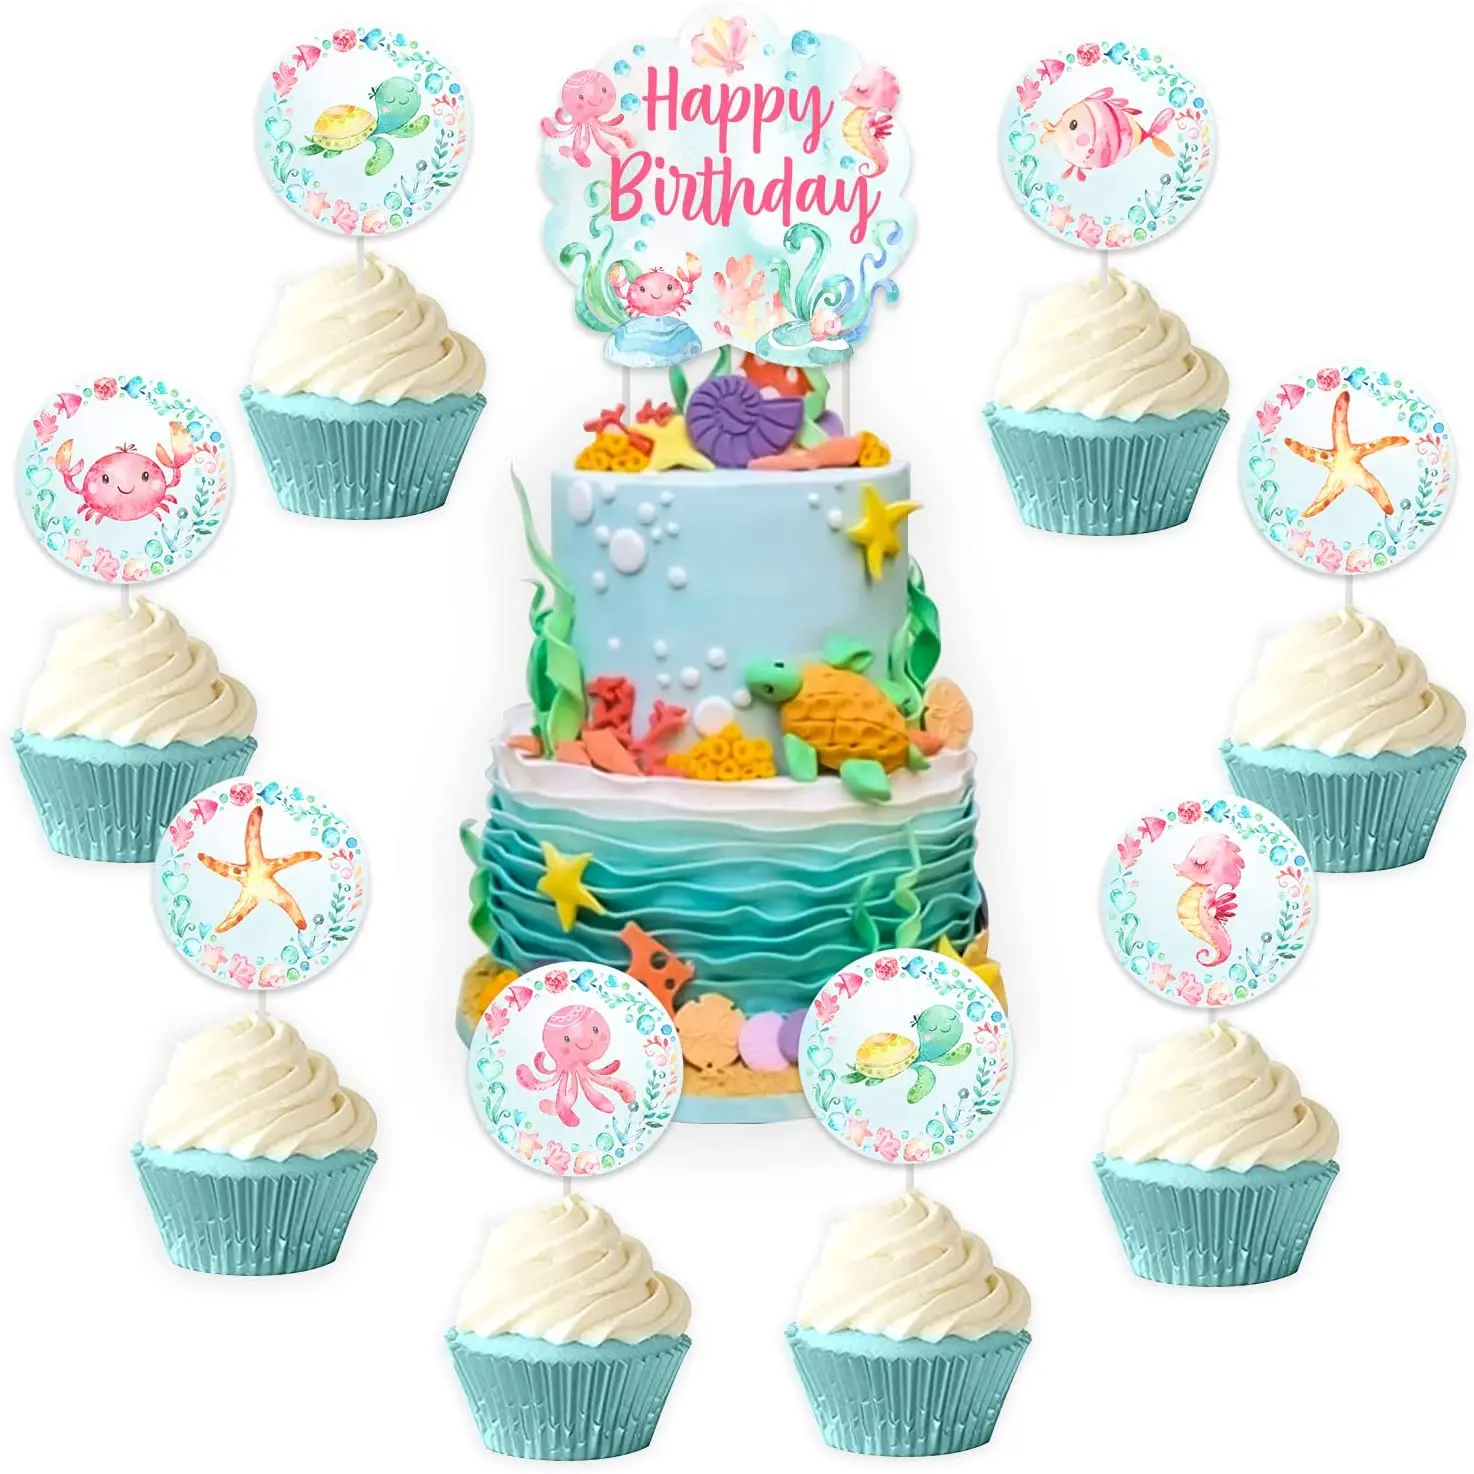 

Ocean Themed Birthday Party Decorations for Girls Happy Birthday Cake Topper Sea Animal Cupcake Toppers Birthday Party Supplies